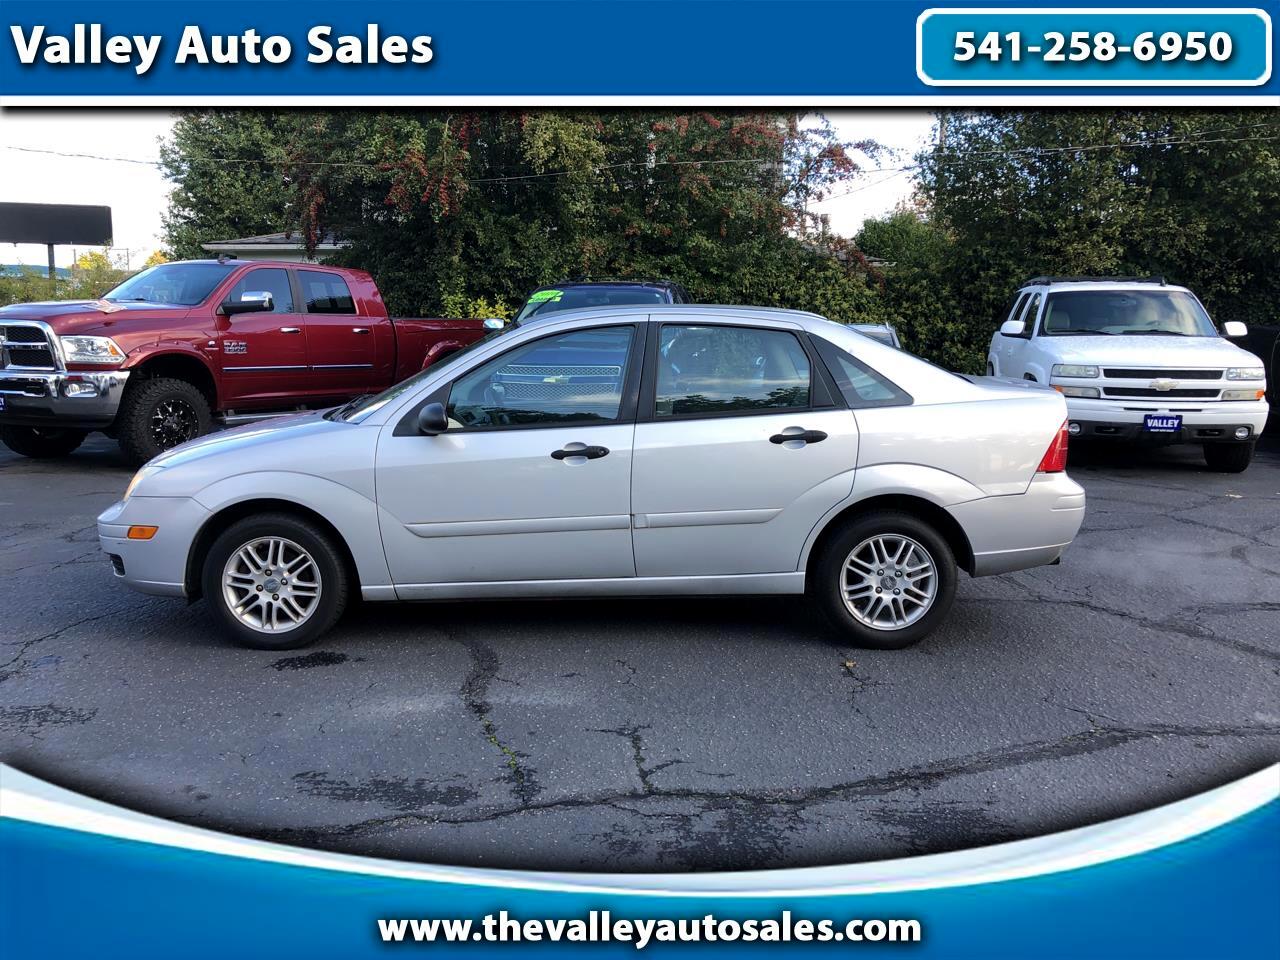 Used 2005 Ford Focus Zx4 S For Sale In Lebanon Or 97355